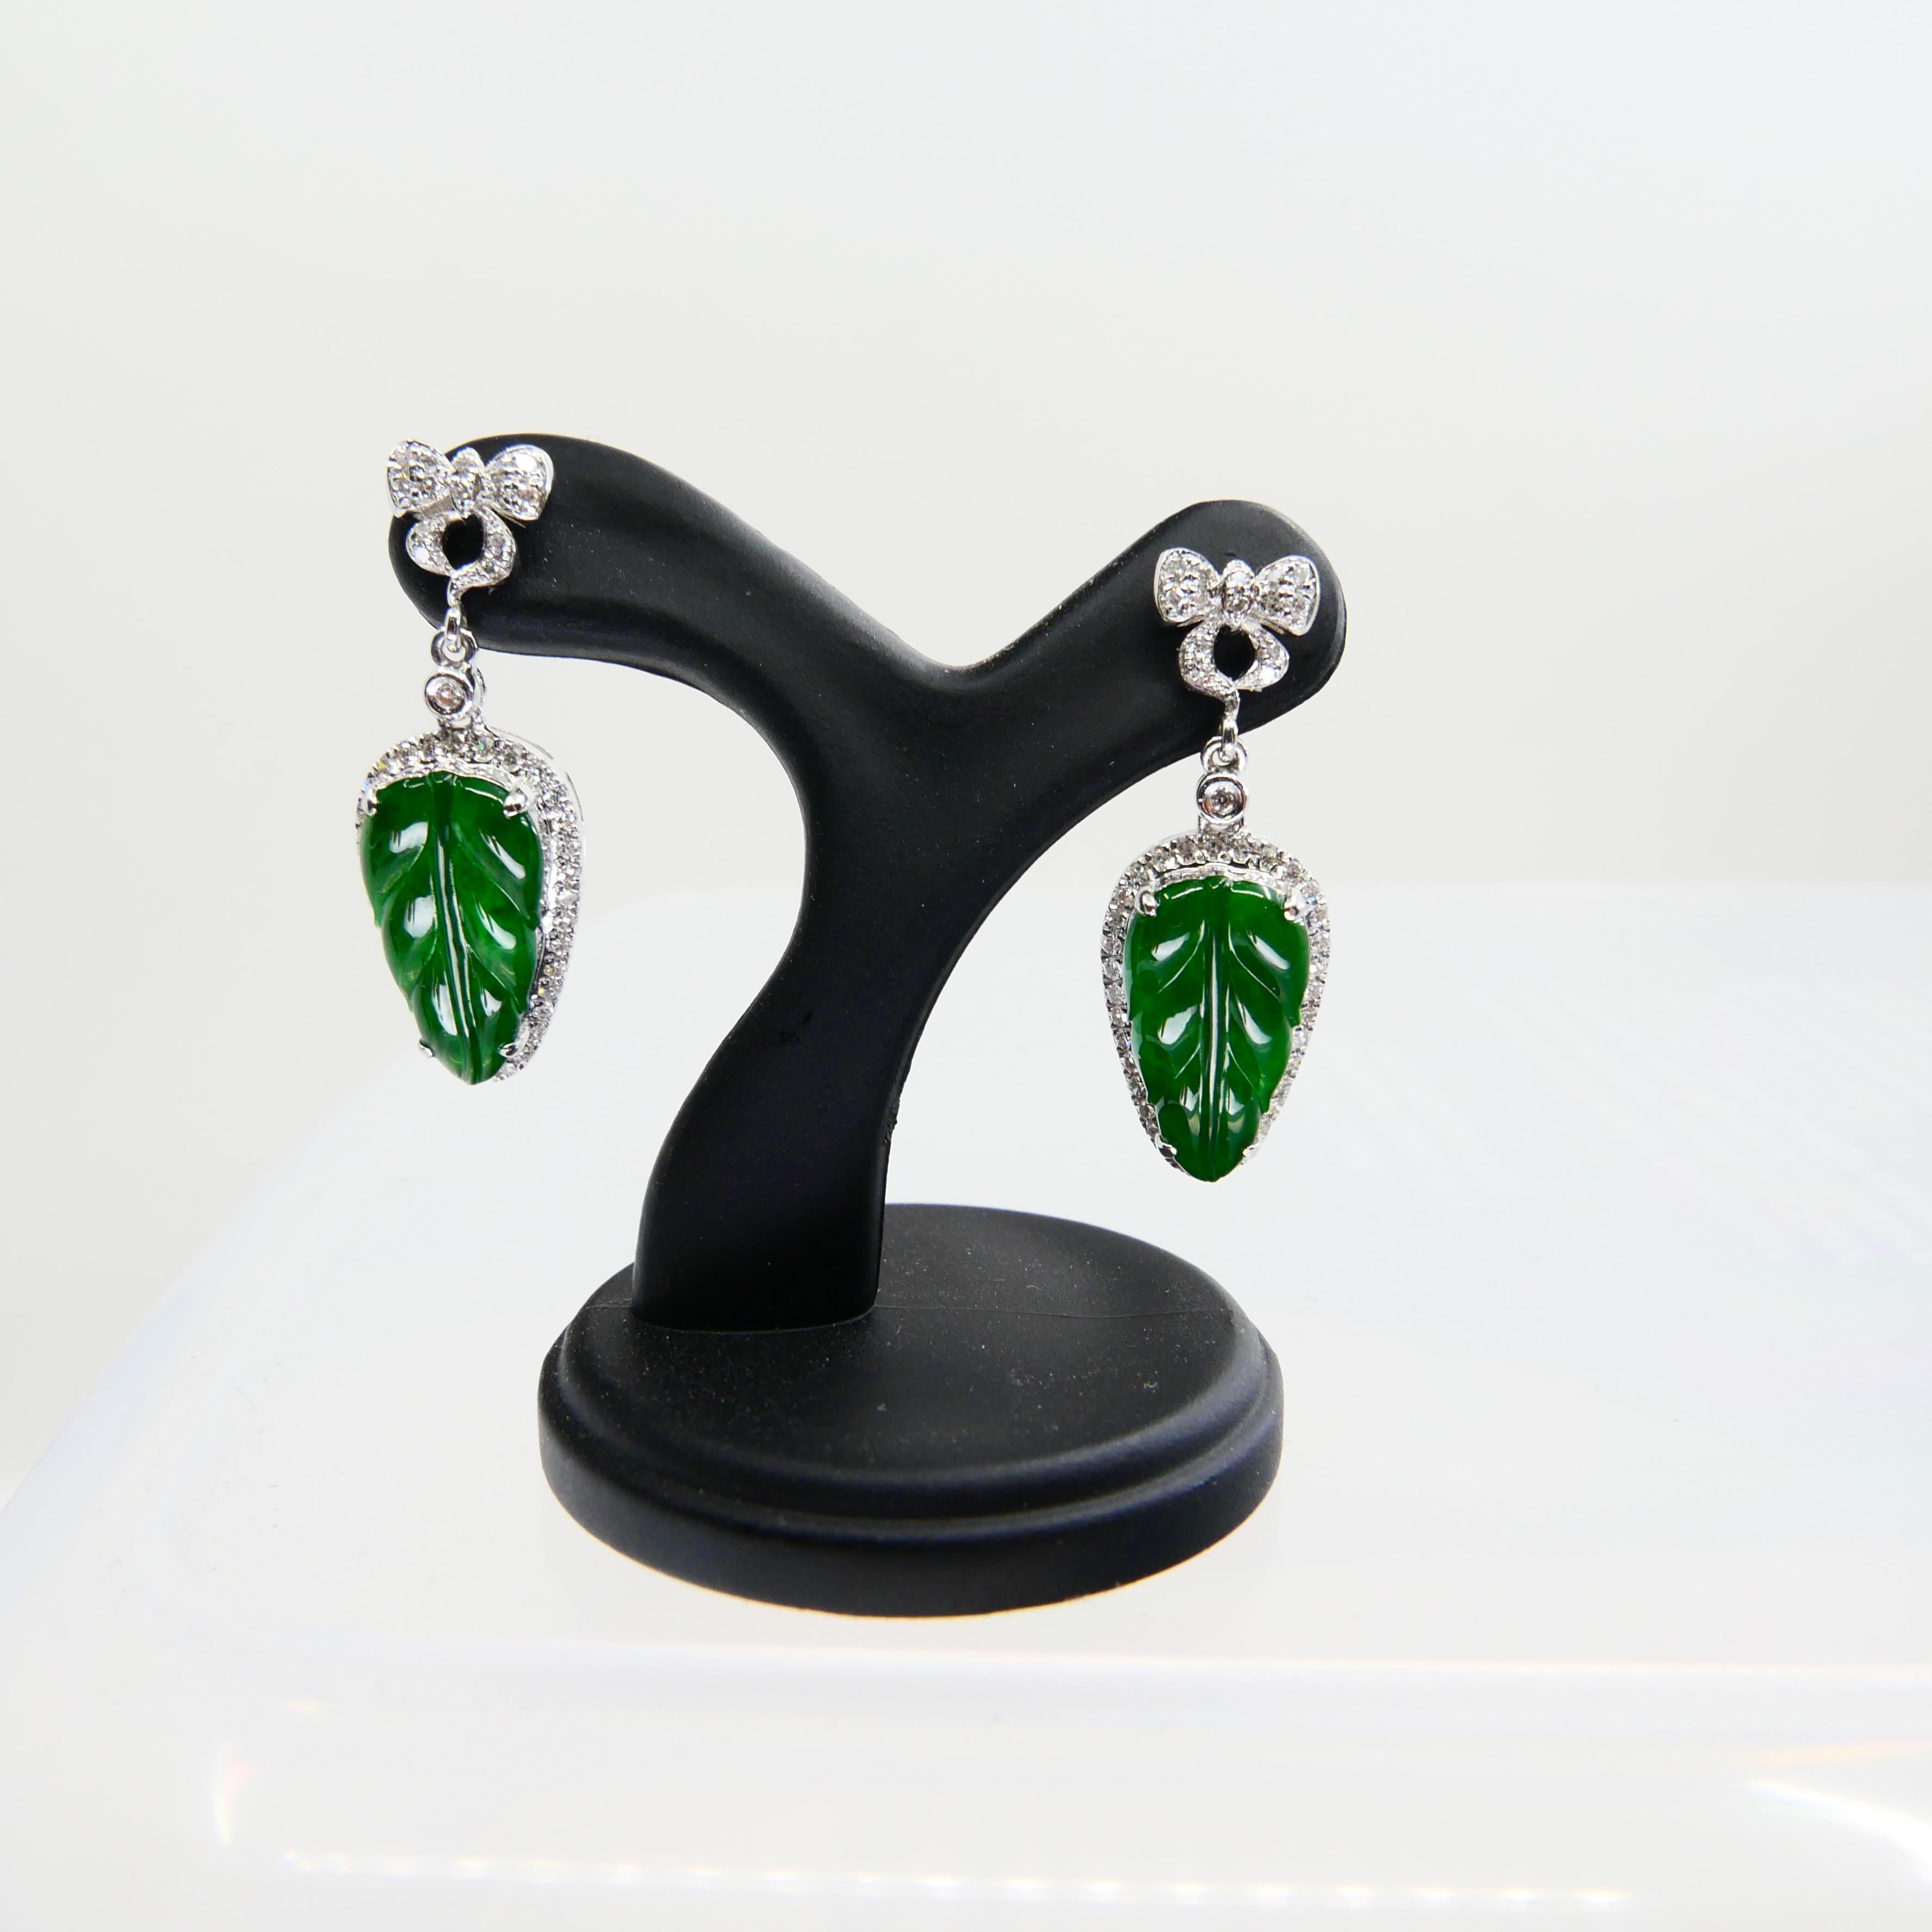 Certified Icy Imperial Green Jade & Diamond Earrings, Collector's Quality For Sale 7